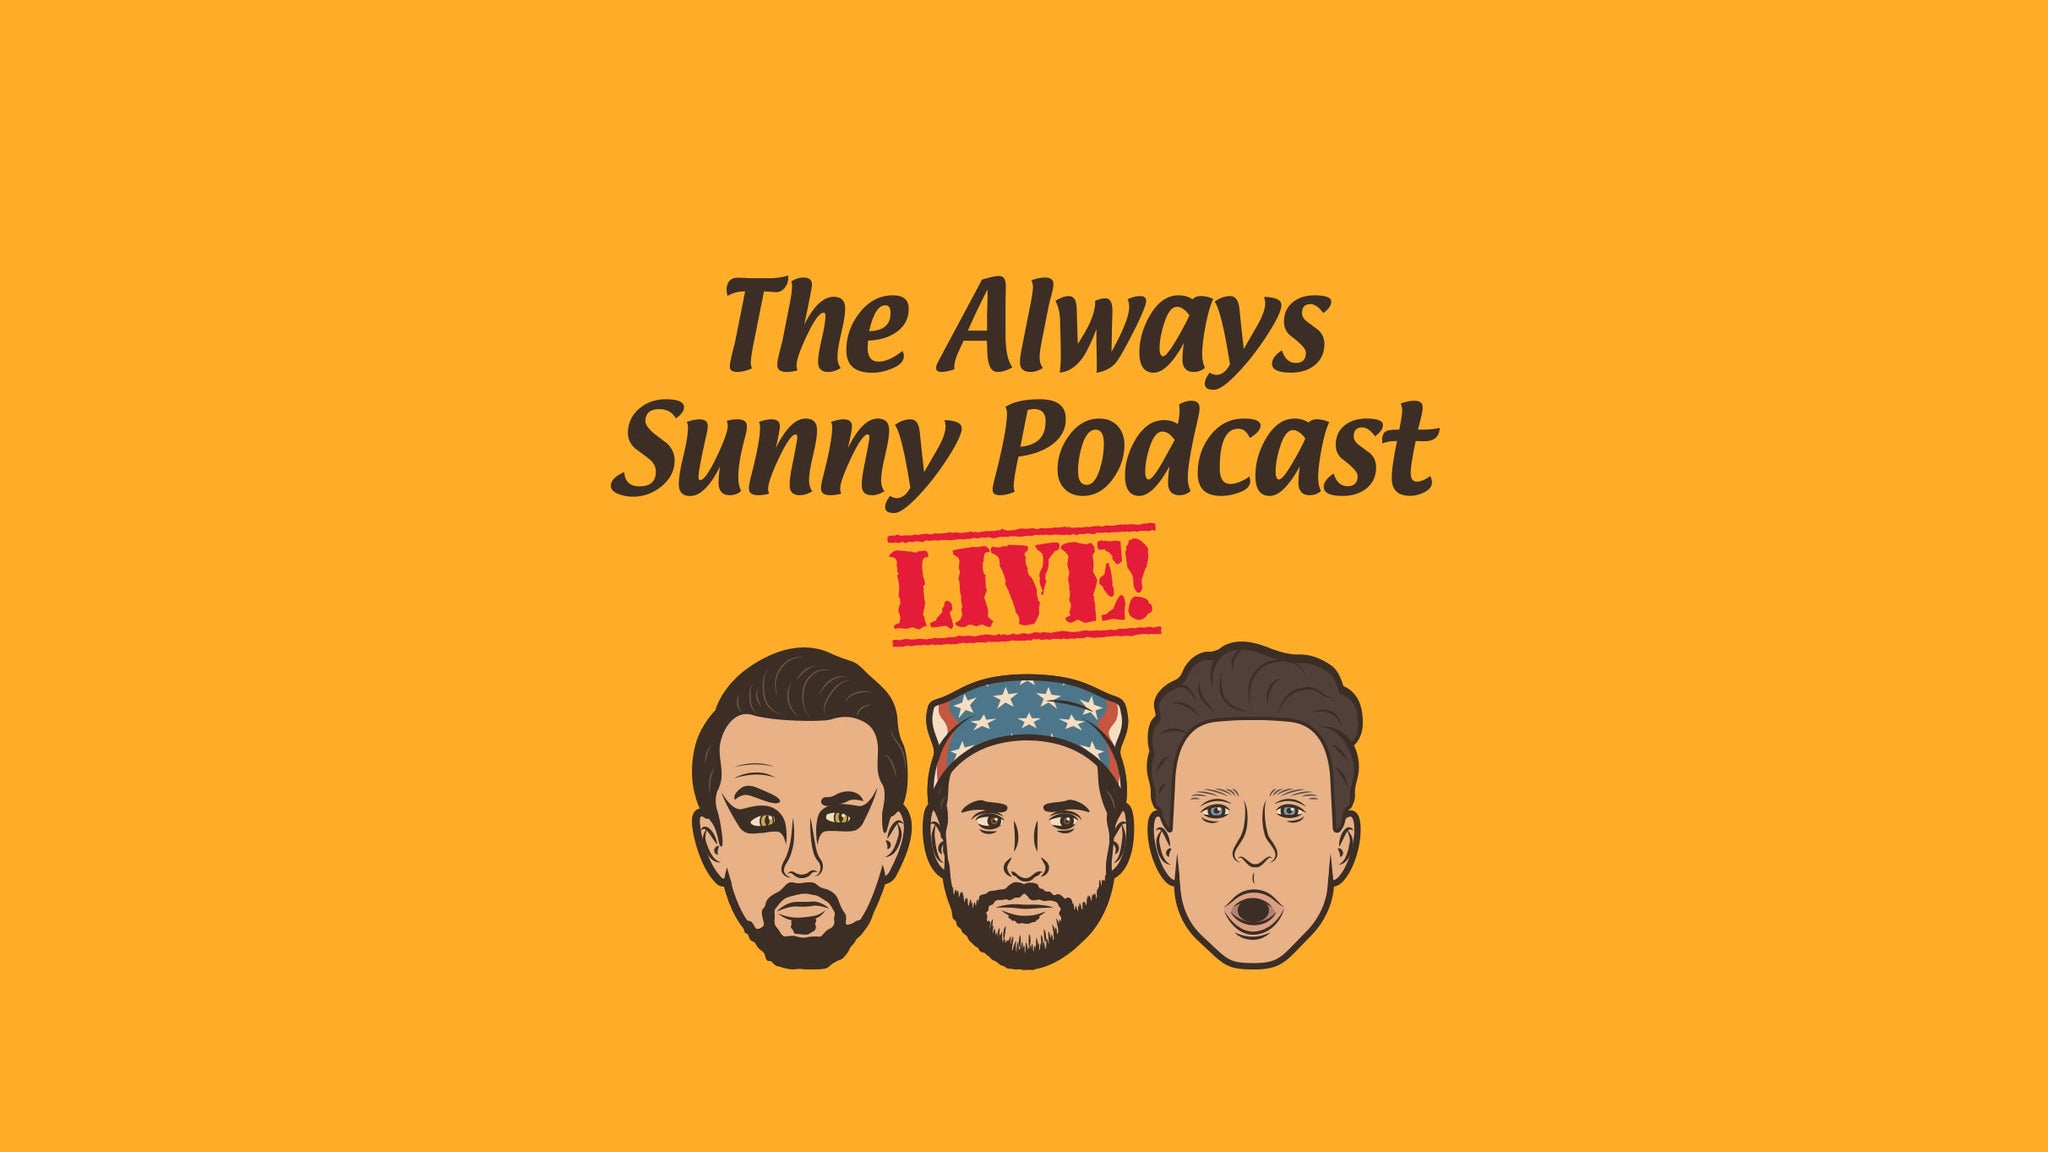 Four Walls Presents The Always Sunny Podcast LIVE! pre-sale passcode for show tickets in New York, NY (Radio City Music Hall)